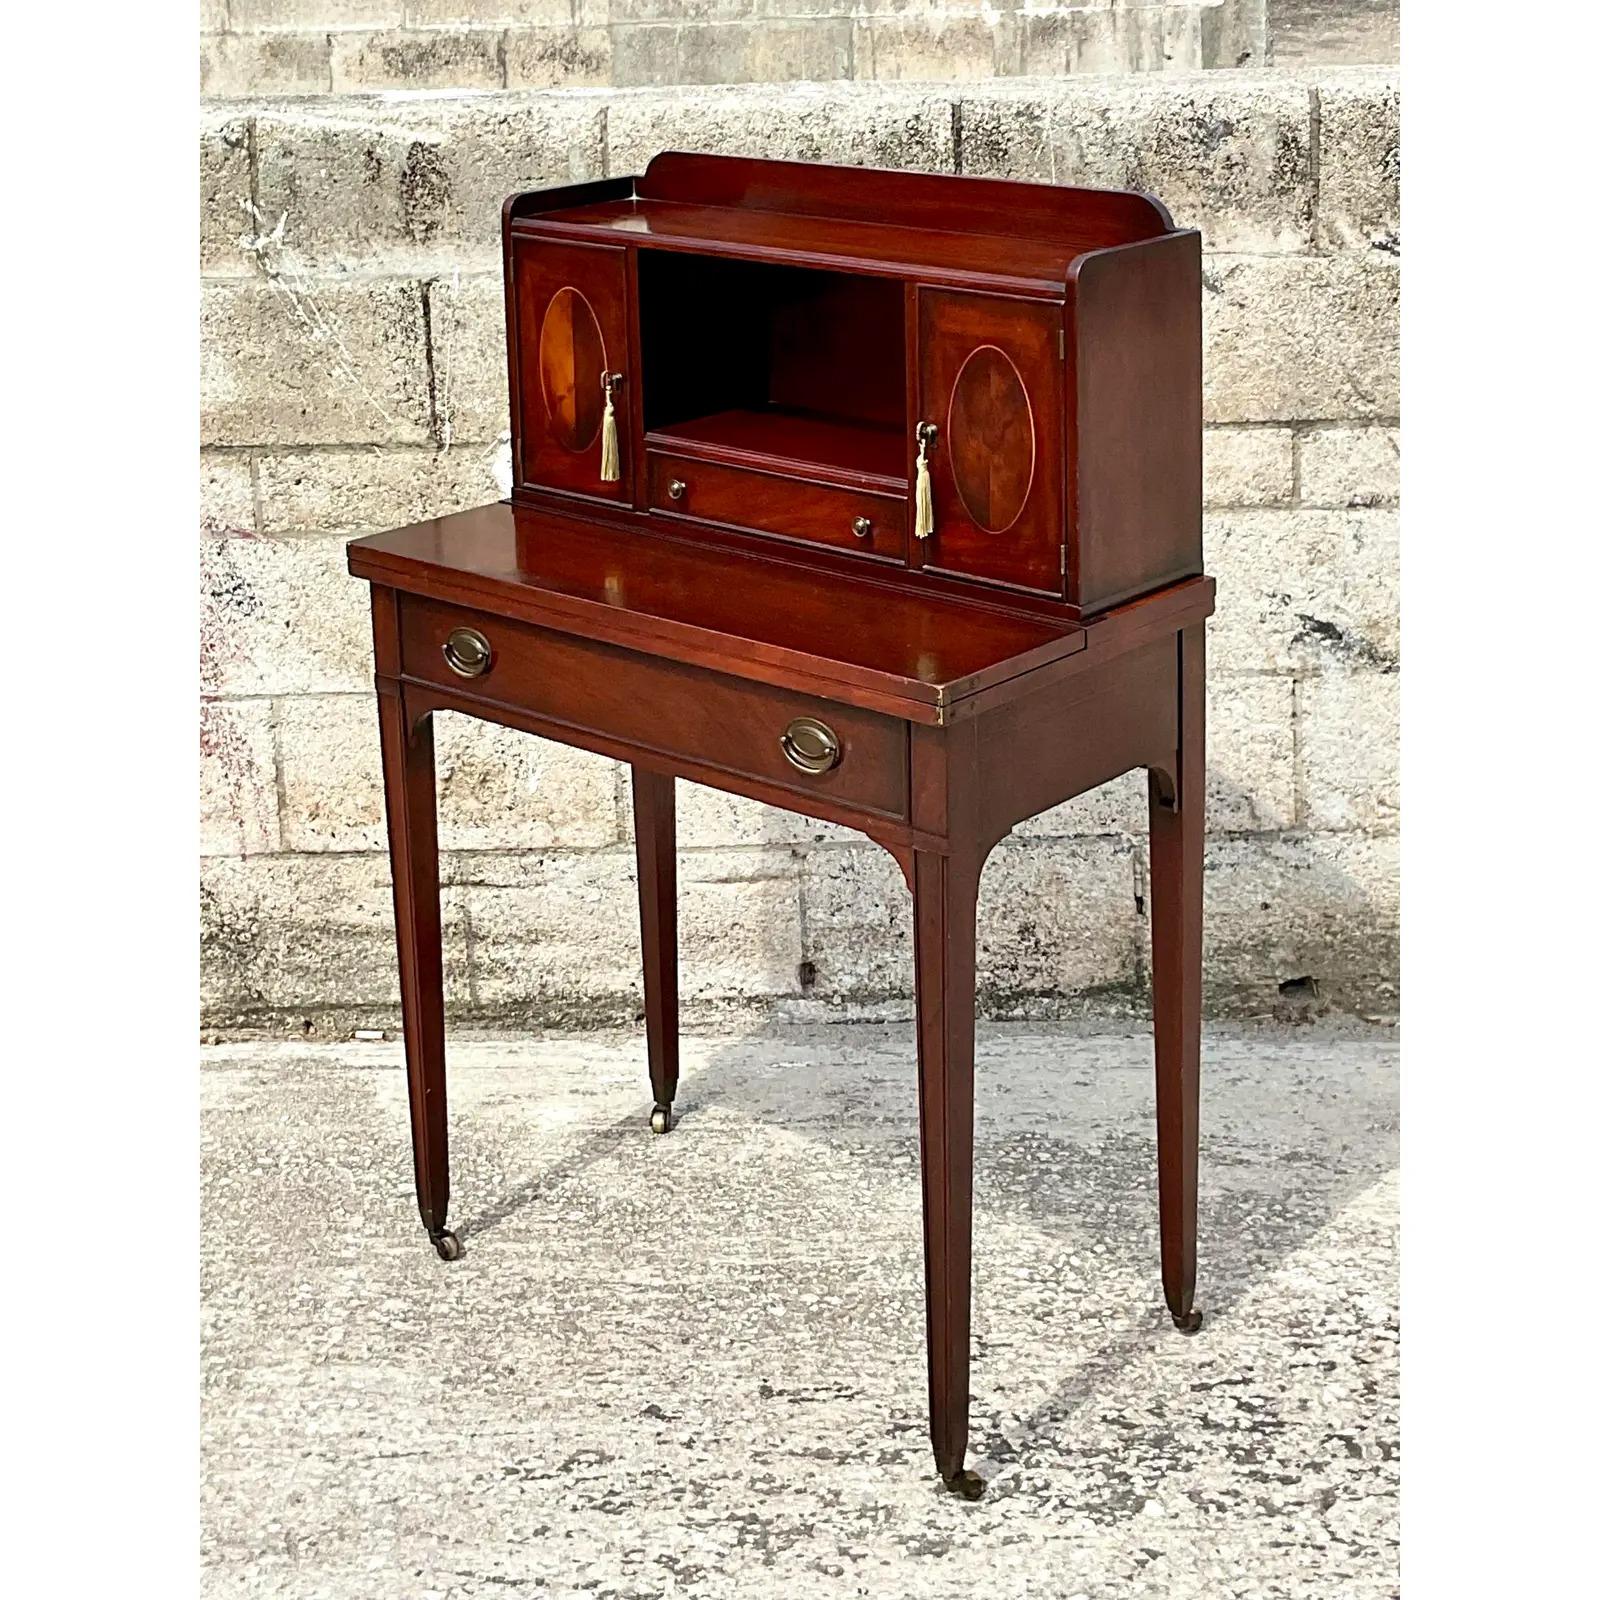 Absolutely charming vintage mahogany desk. A petite secretary with lots of little doors and drawers. Perfect for a home office or guest room. A little chameleon. Acquired from a Palm Beach estate.